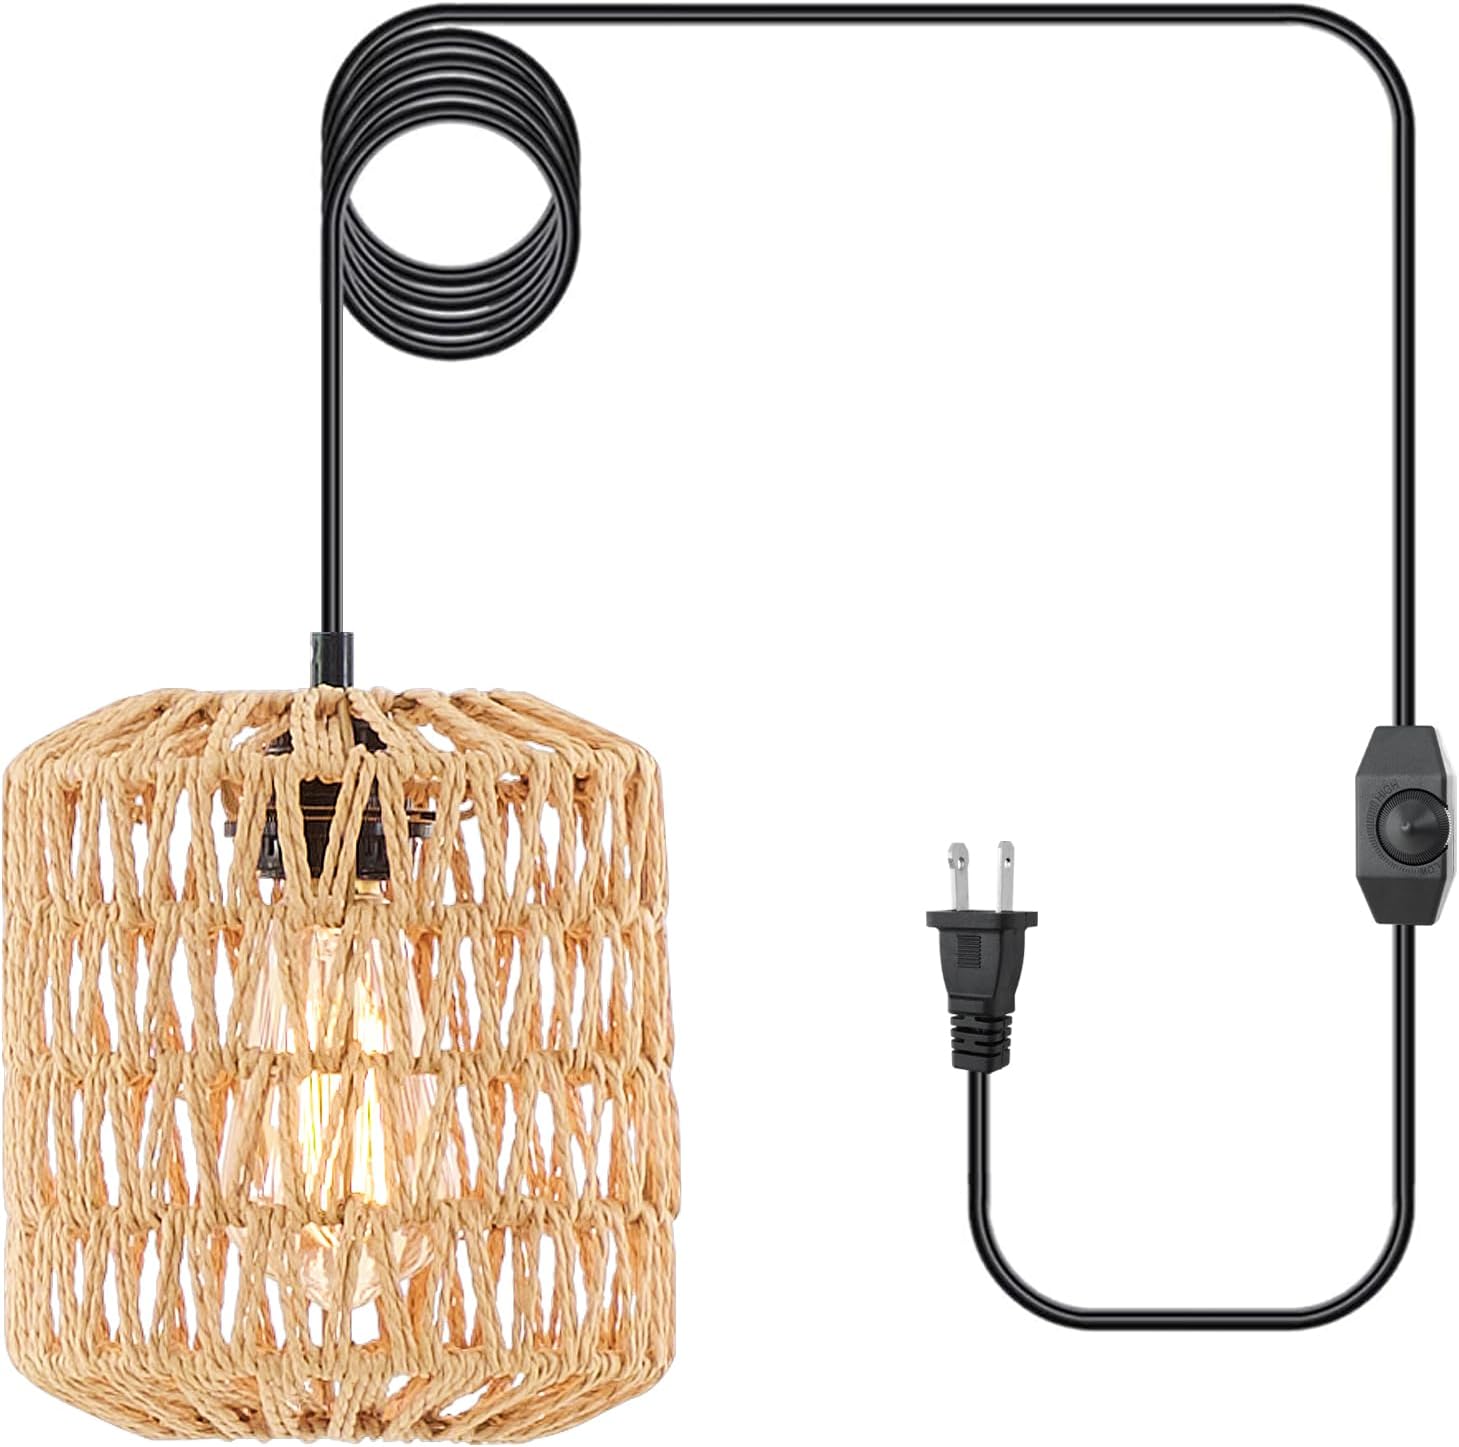 Plug in Pendant Light Review